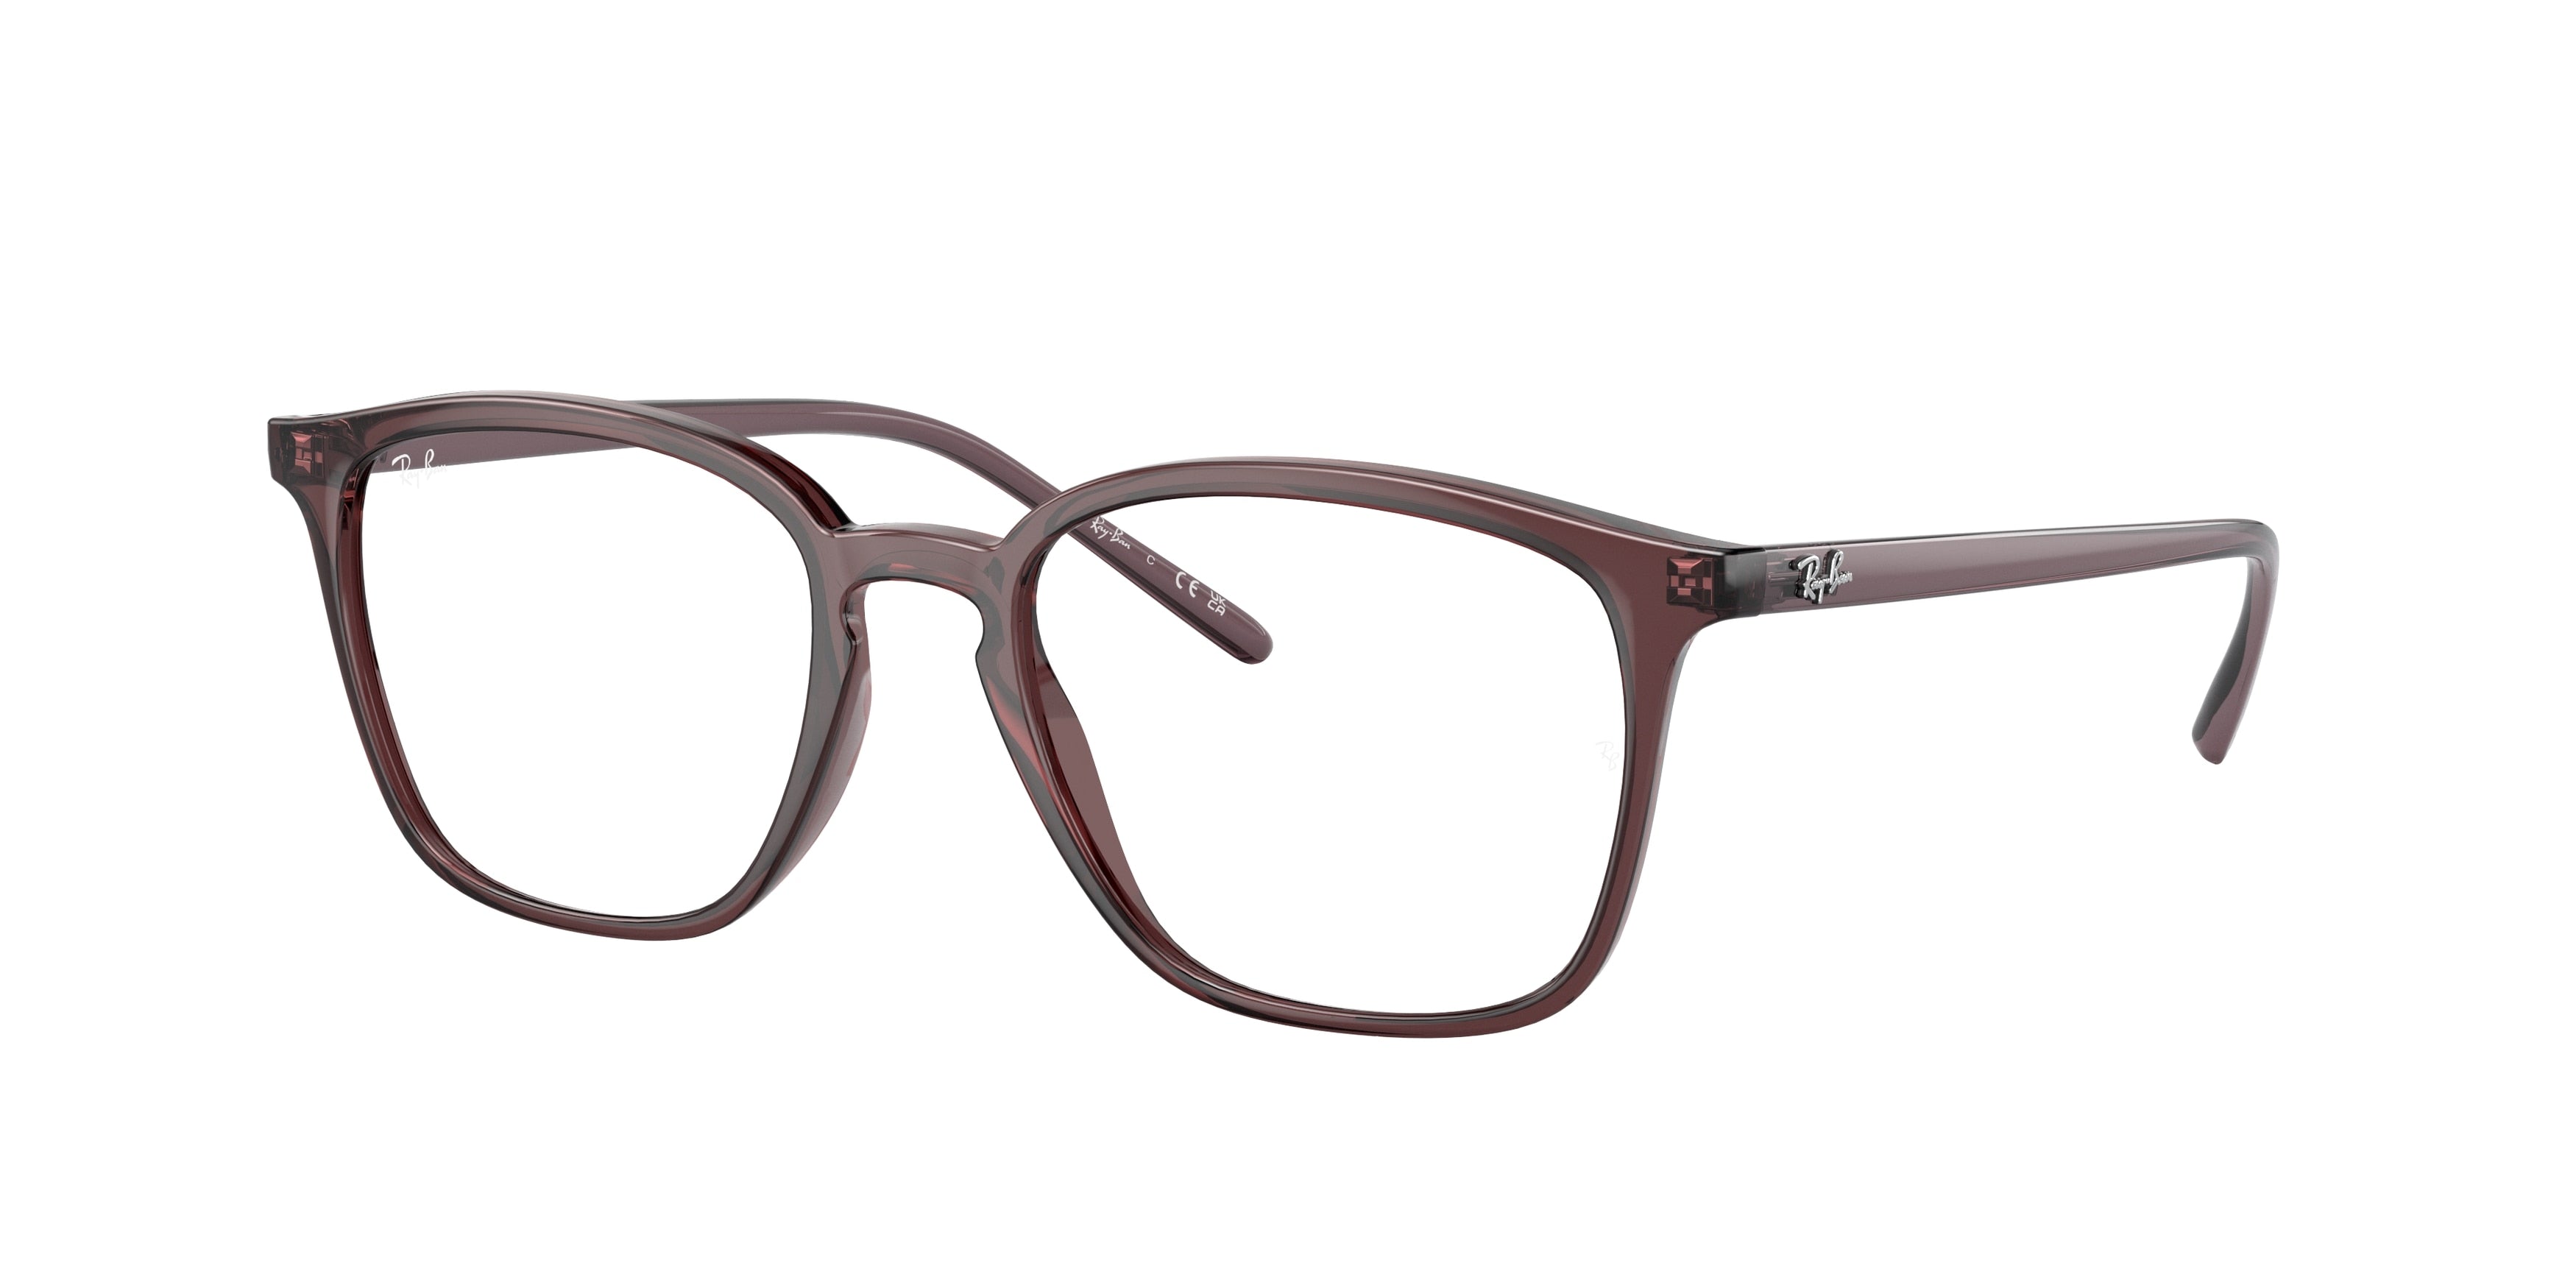 Ray-Ban Optical RX7185 Square Eyeglasses  8236-Transparent Brown 52-145-18 - Color Map Brown